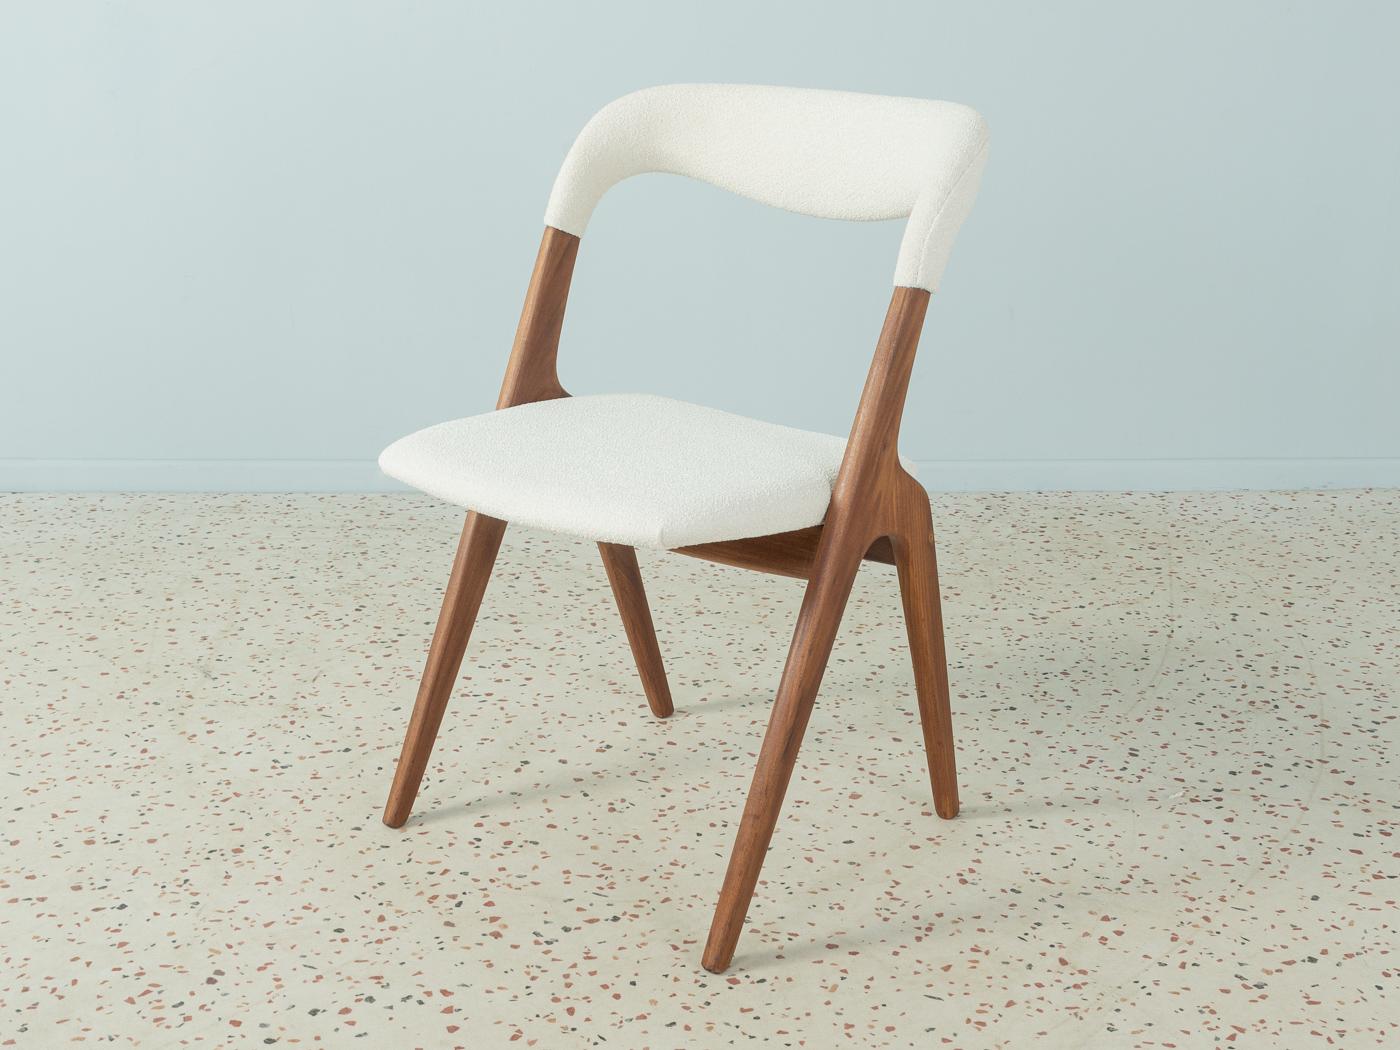 Elegant chair designed by Johannes Andersen for Vamo Sønderborg in the 1960s. Solid teak frame. The chair has been reupholstered and covered with a high-quality cream-white upholstery fabric.

Quality Features:
very good workmanship
high-quality